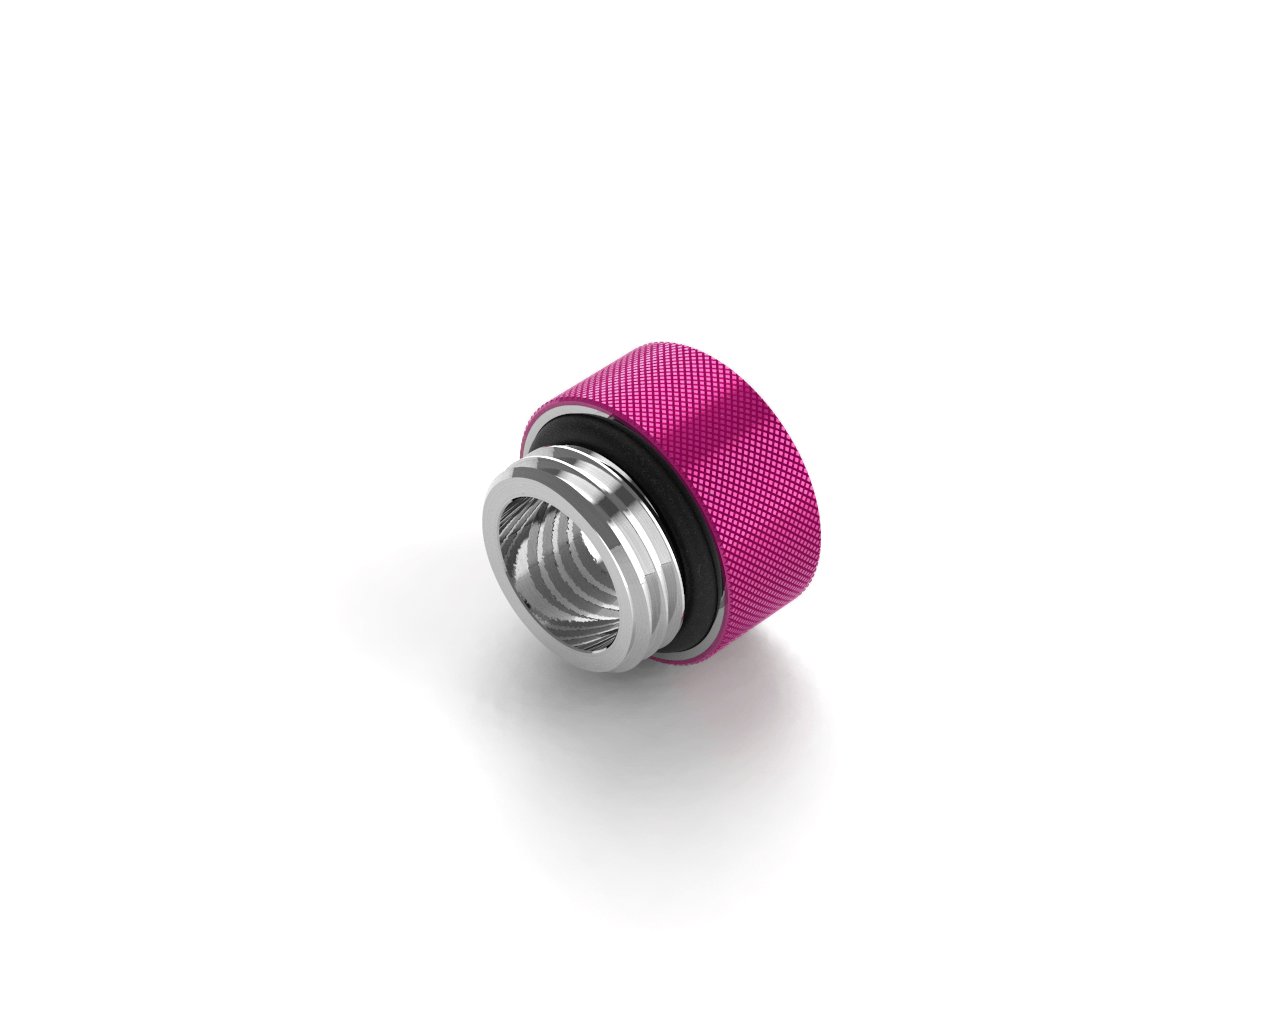 PrimoChill Male to Female G 1/4in. 7.5mm SX Extension Coupler - PrimoChill - KEEPING IT COOL Candy Pink